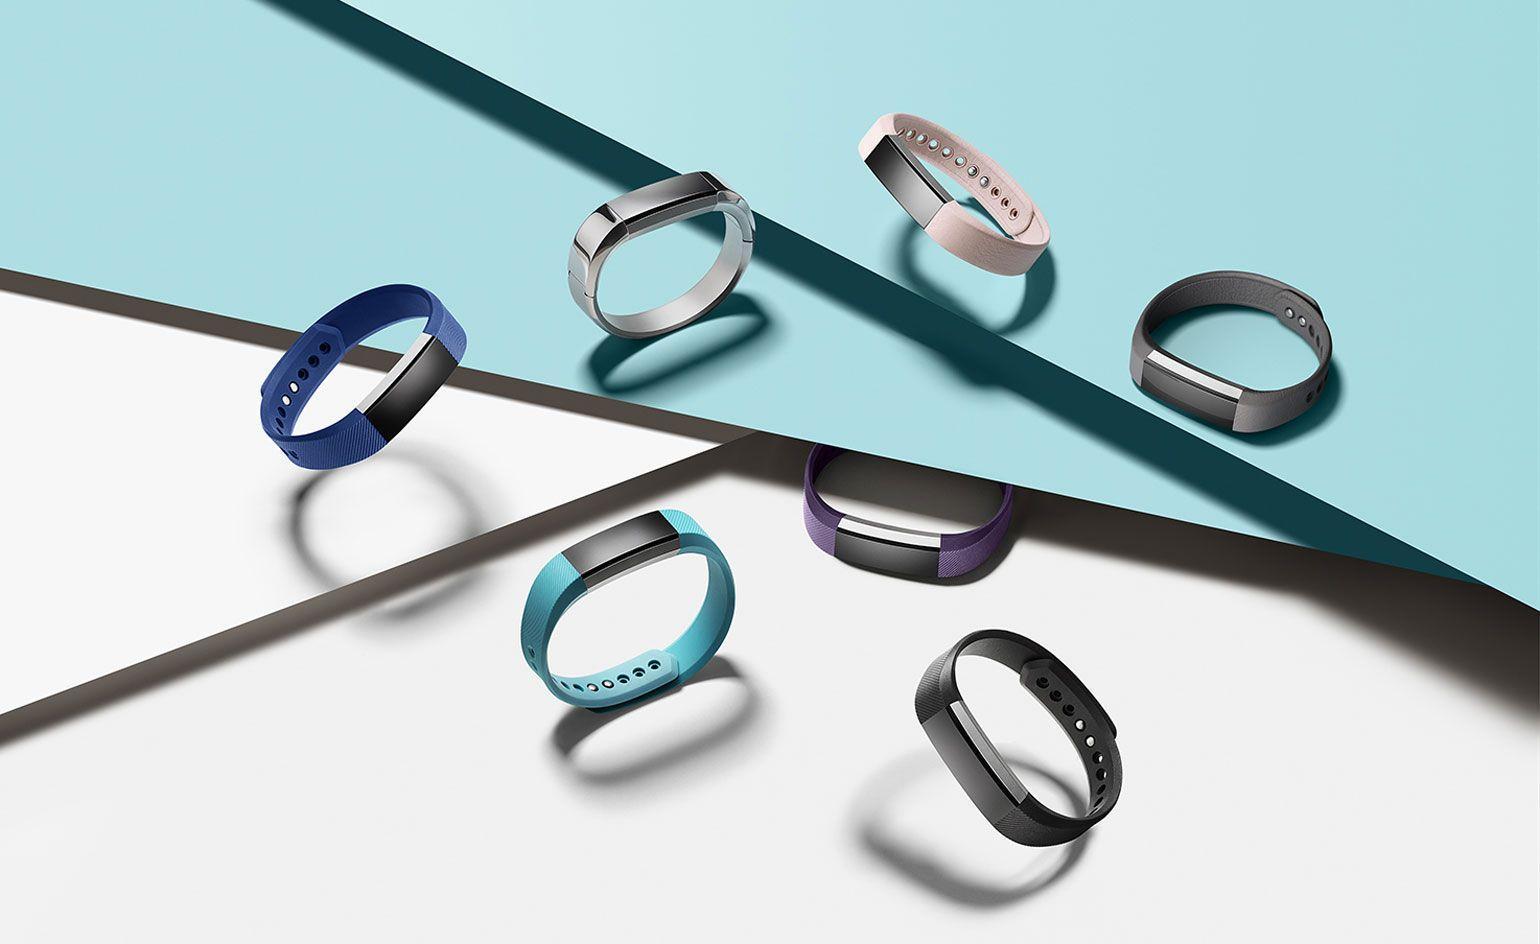 Best fitness bands and watches. Wallpaper*